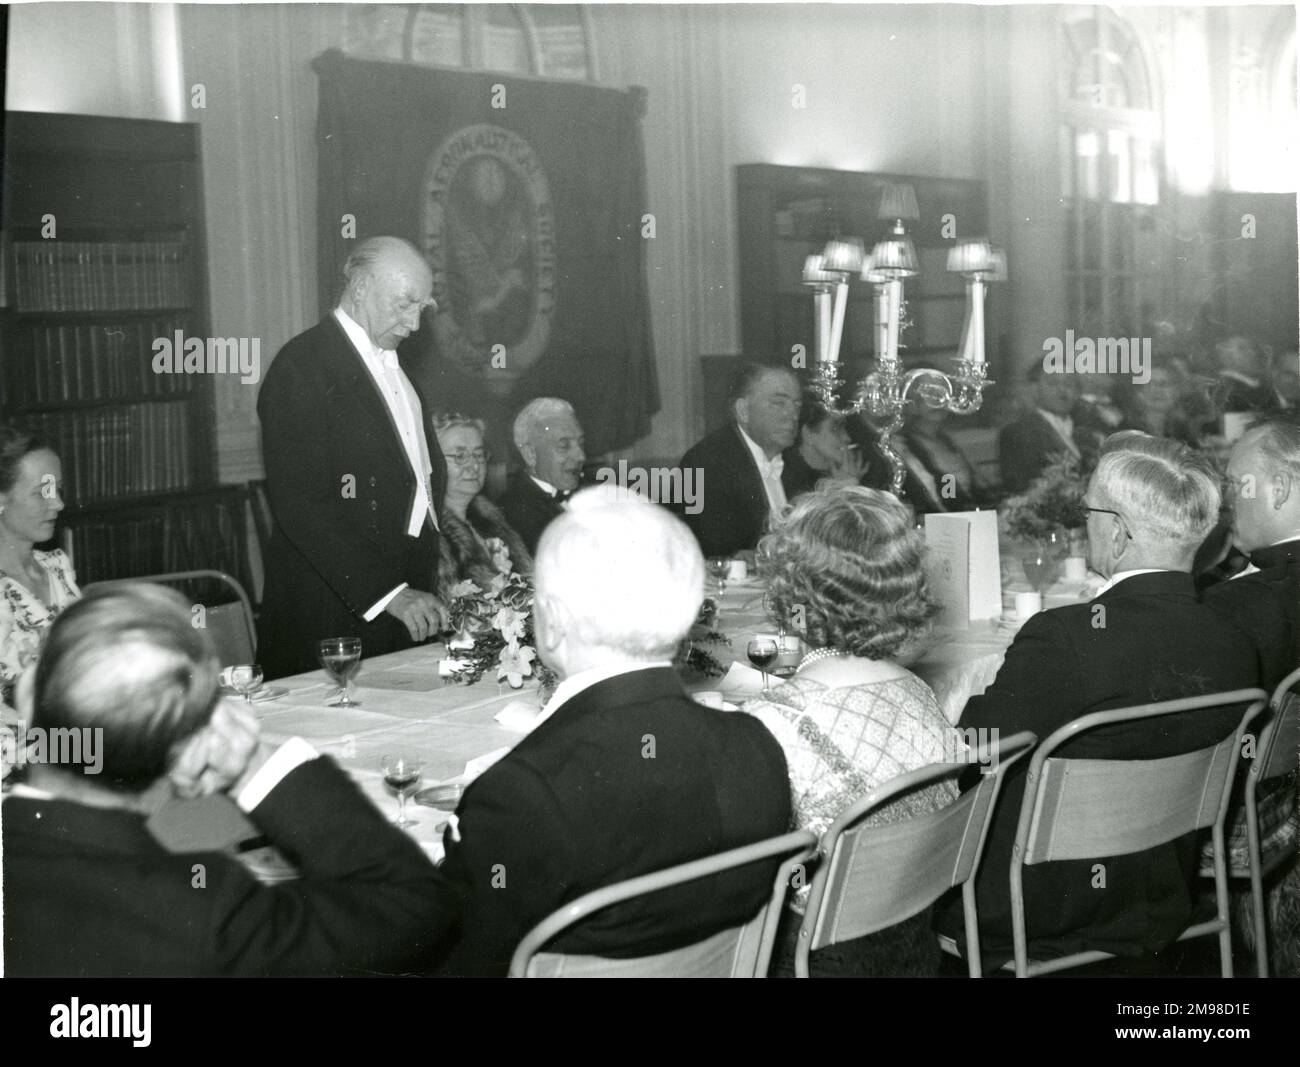 The Royal Aeronautical Society held a dinner at No.4 Hamilton Place in 1949 to celebrate the granting of its Royal Charter dated 22 December 1948. ACM Sir Frederick Bowhill speaks after dinner. Stock Photo